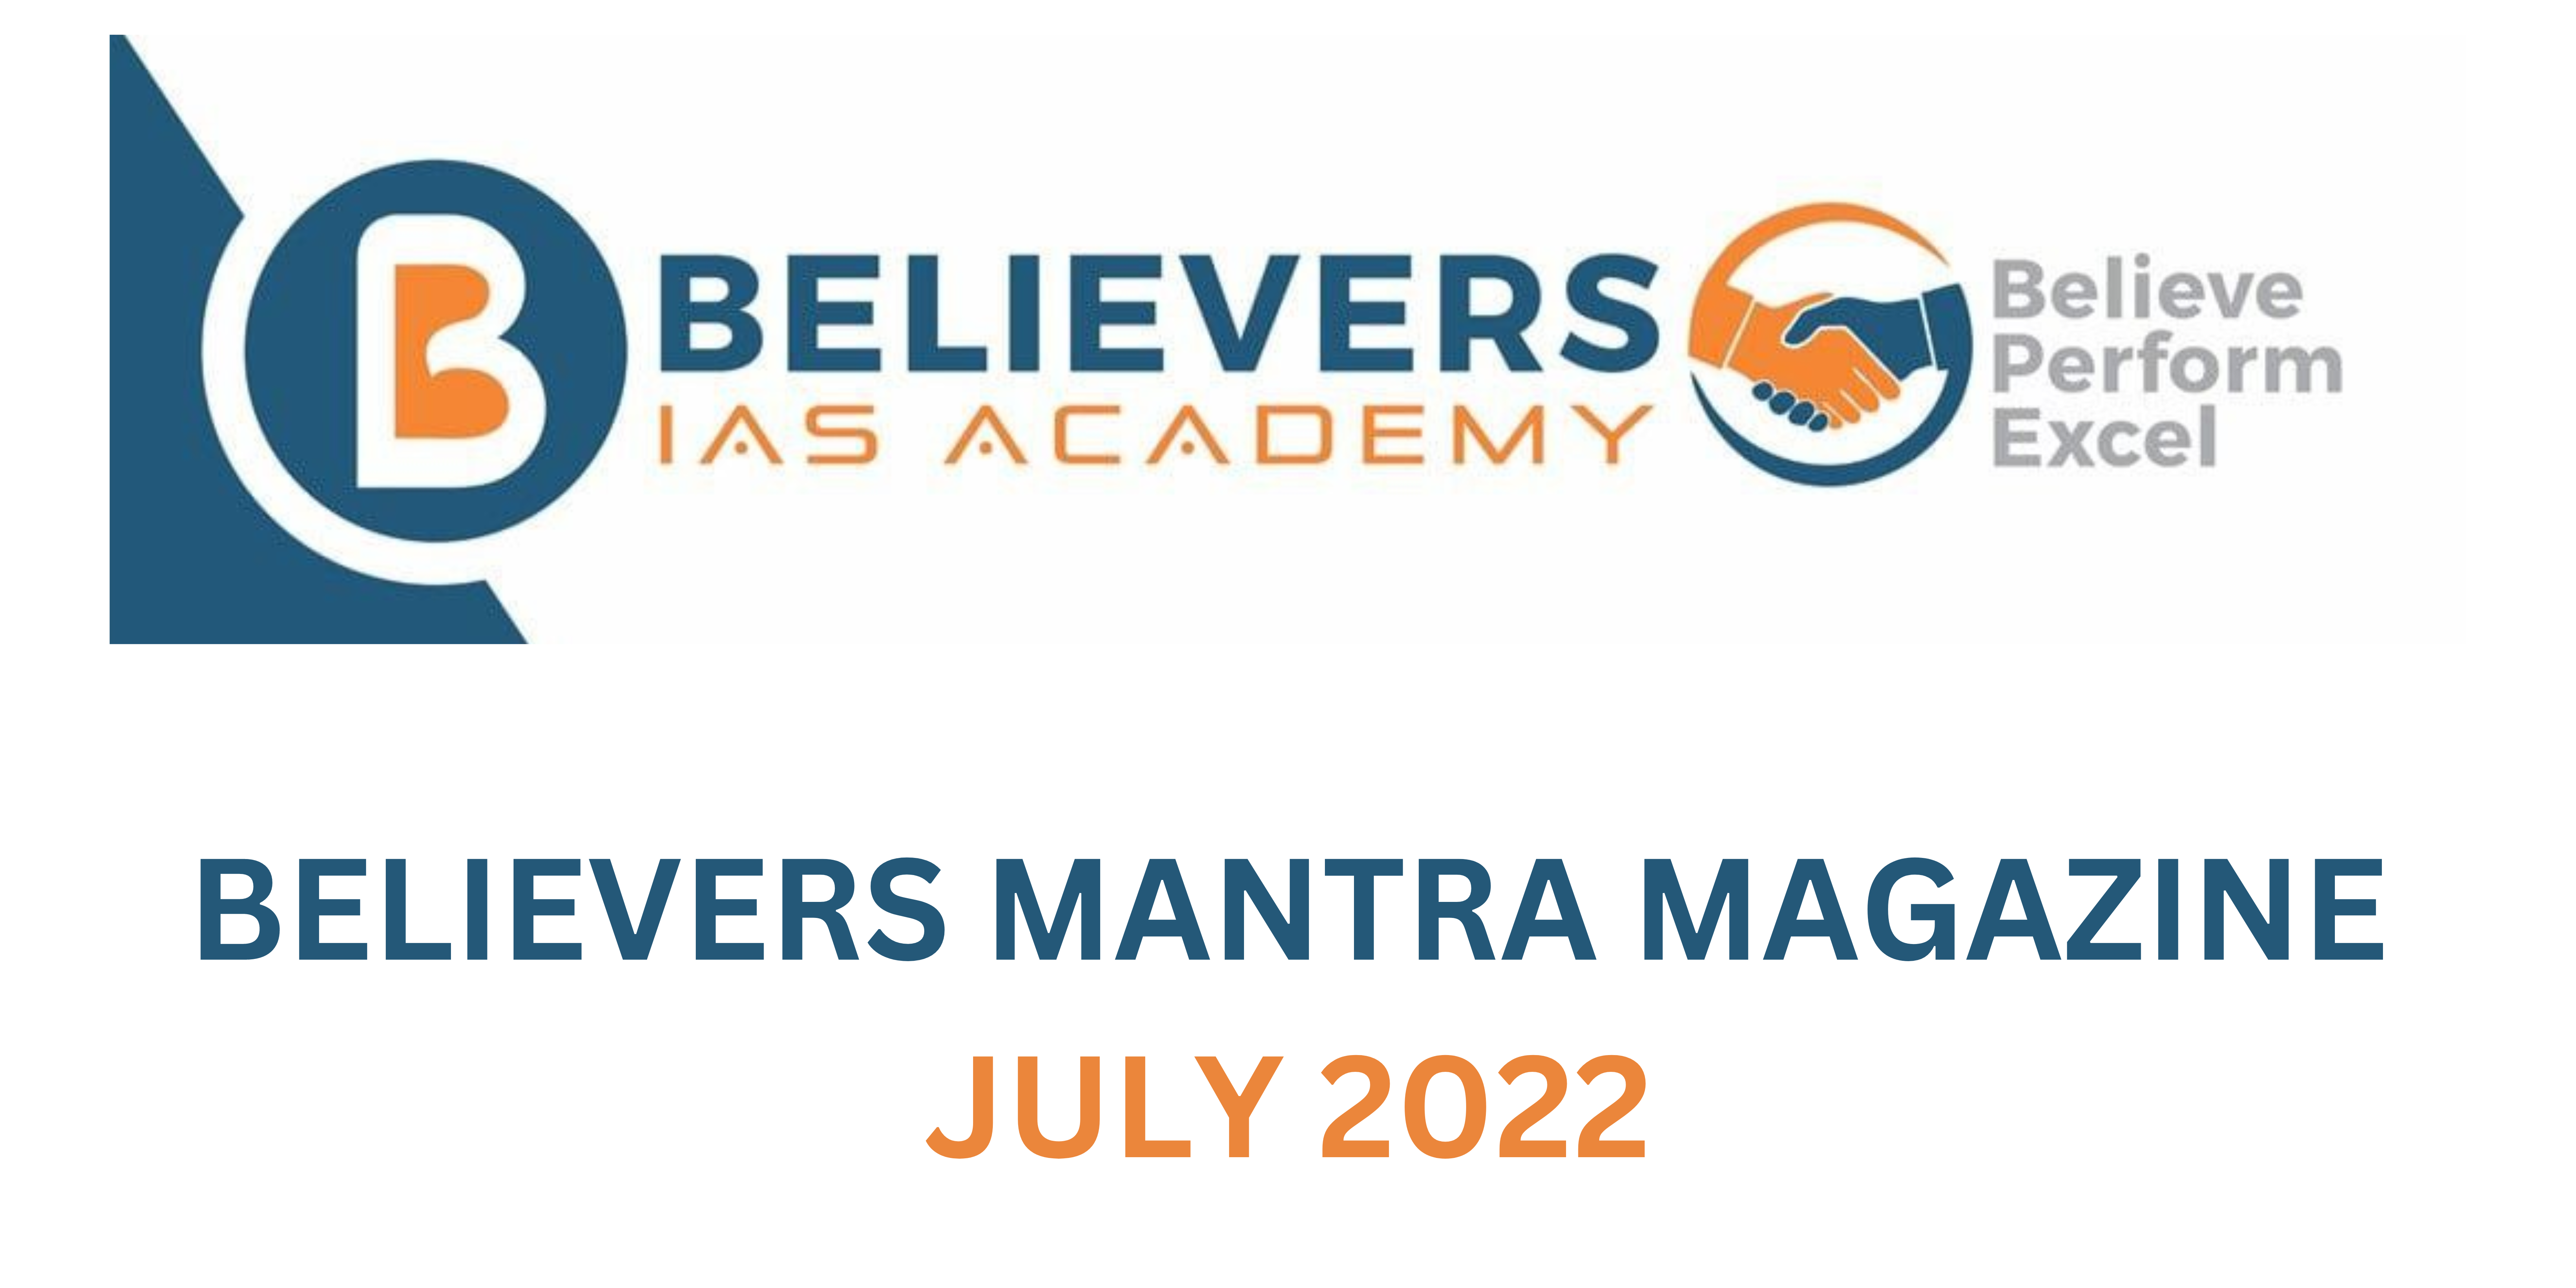 Believers Mantra Magazines - July 2022